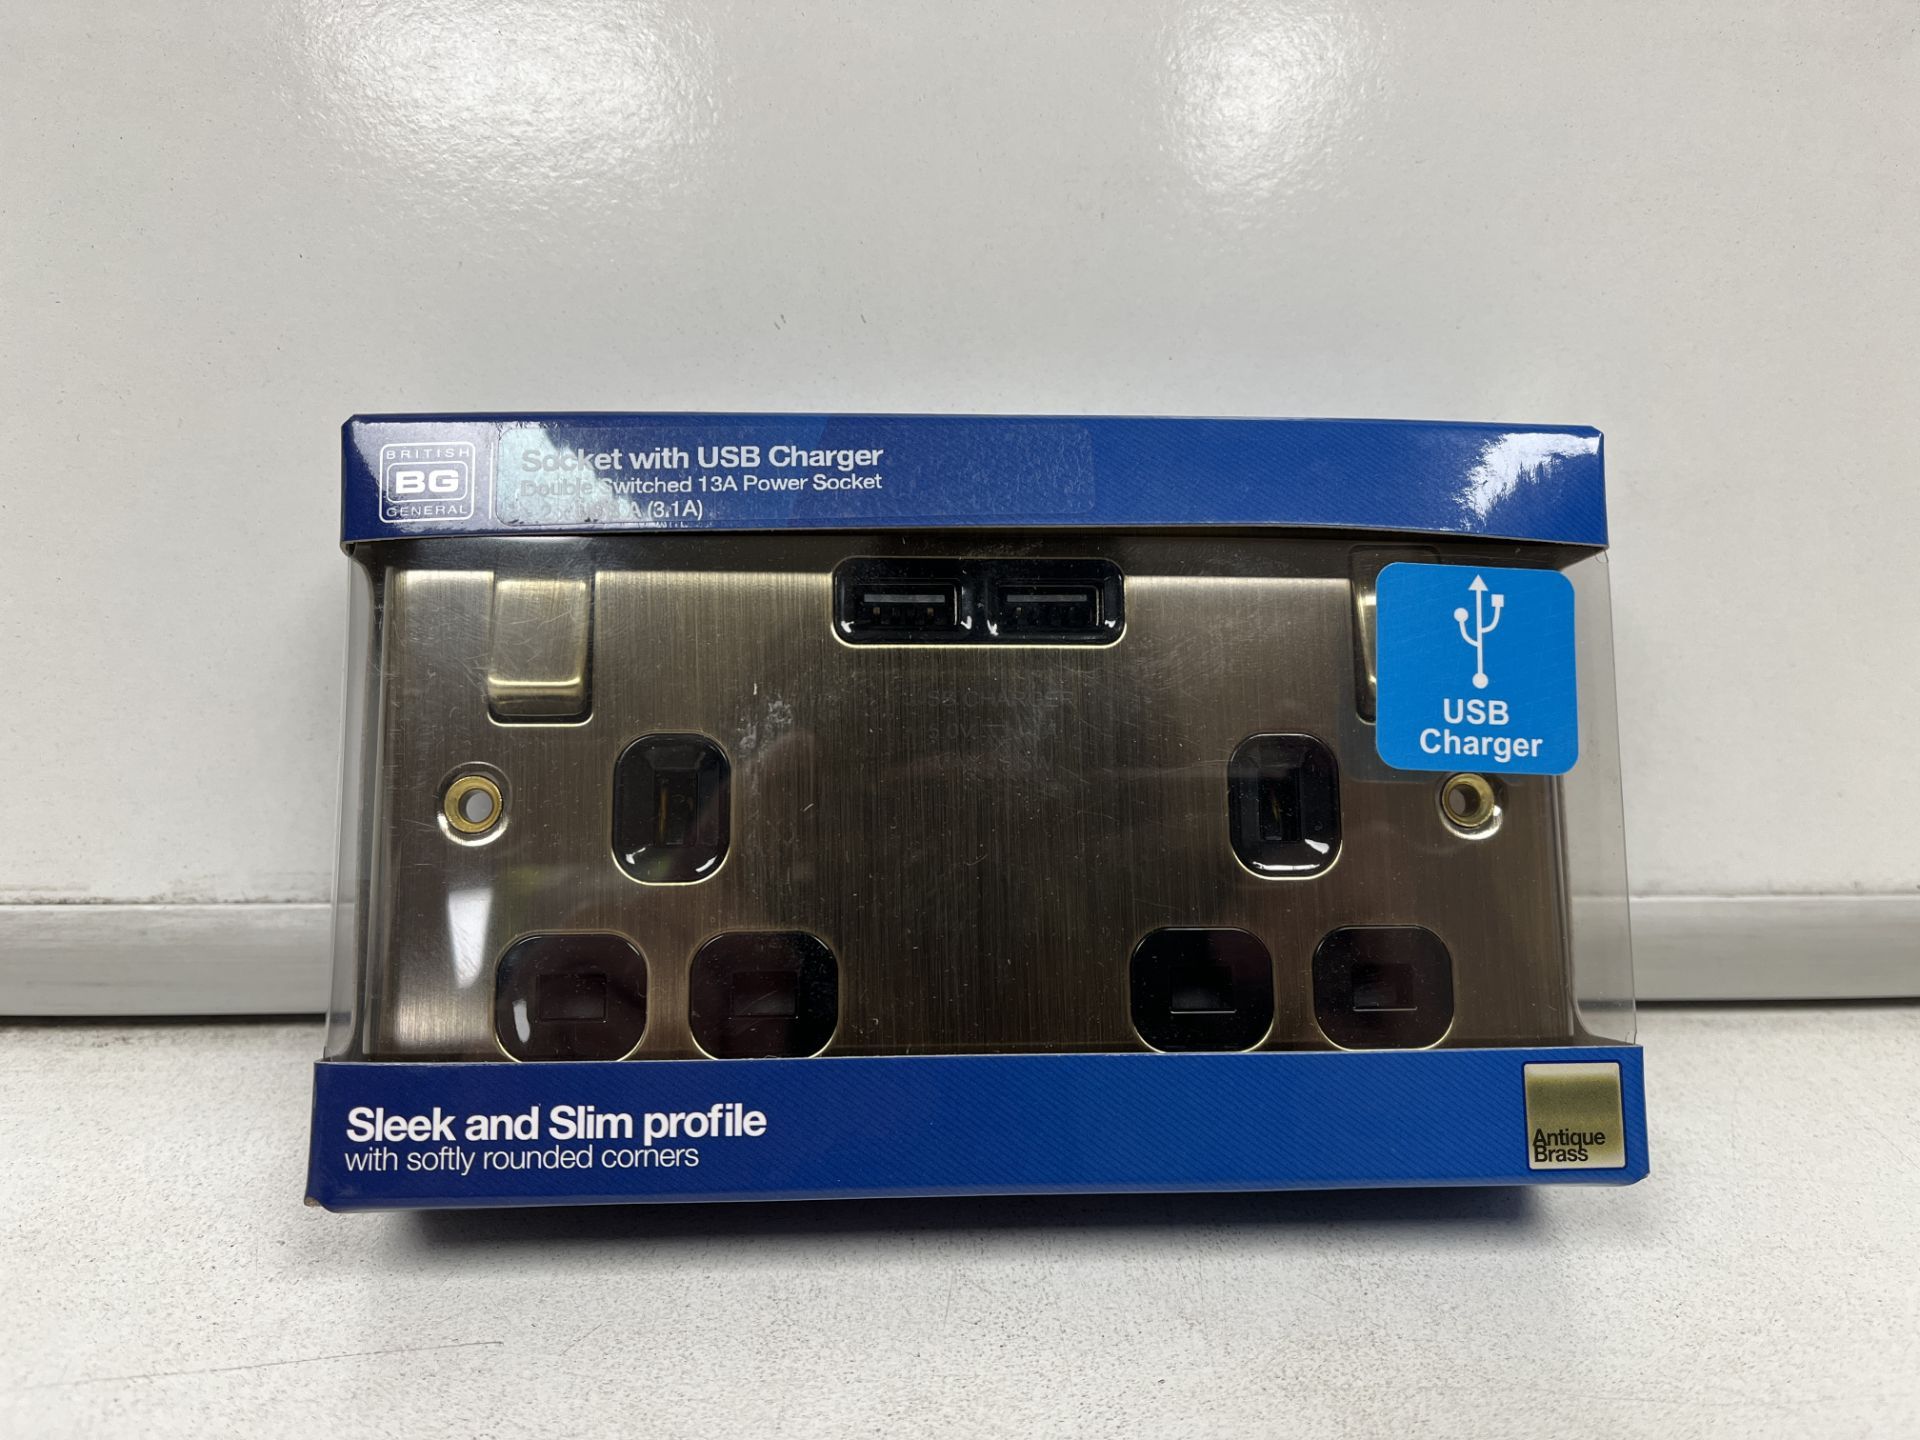 TRADE LOT 50 X NEW BOXED BG DOUBLE SOCKET WITH USB CHARGER. 13A POWER SOCKET WITH 2 USB A. SLEEK AND